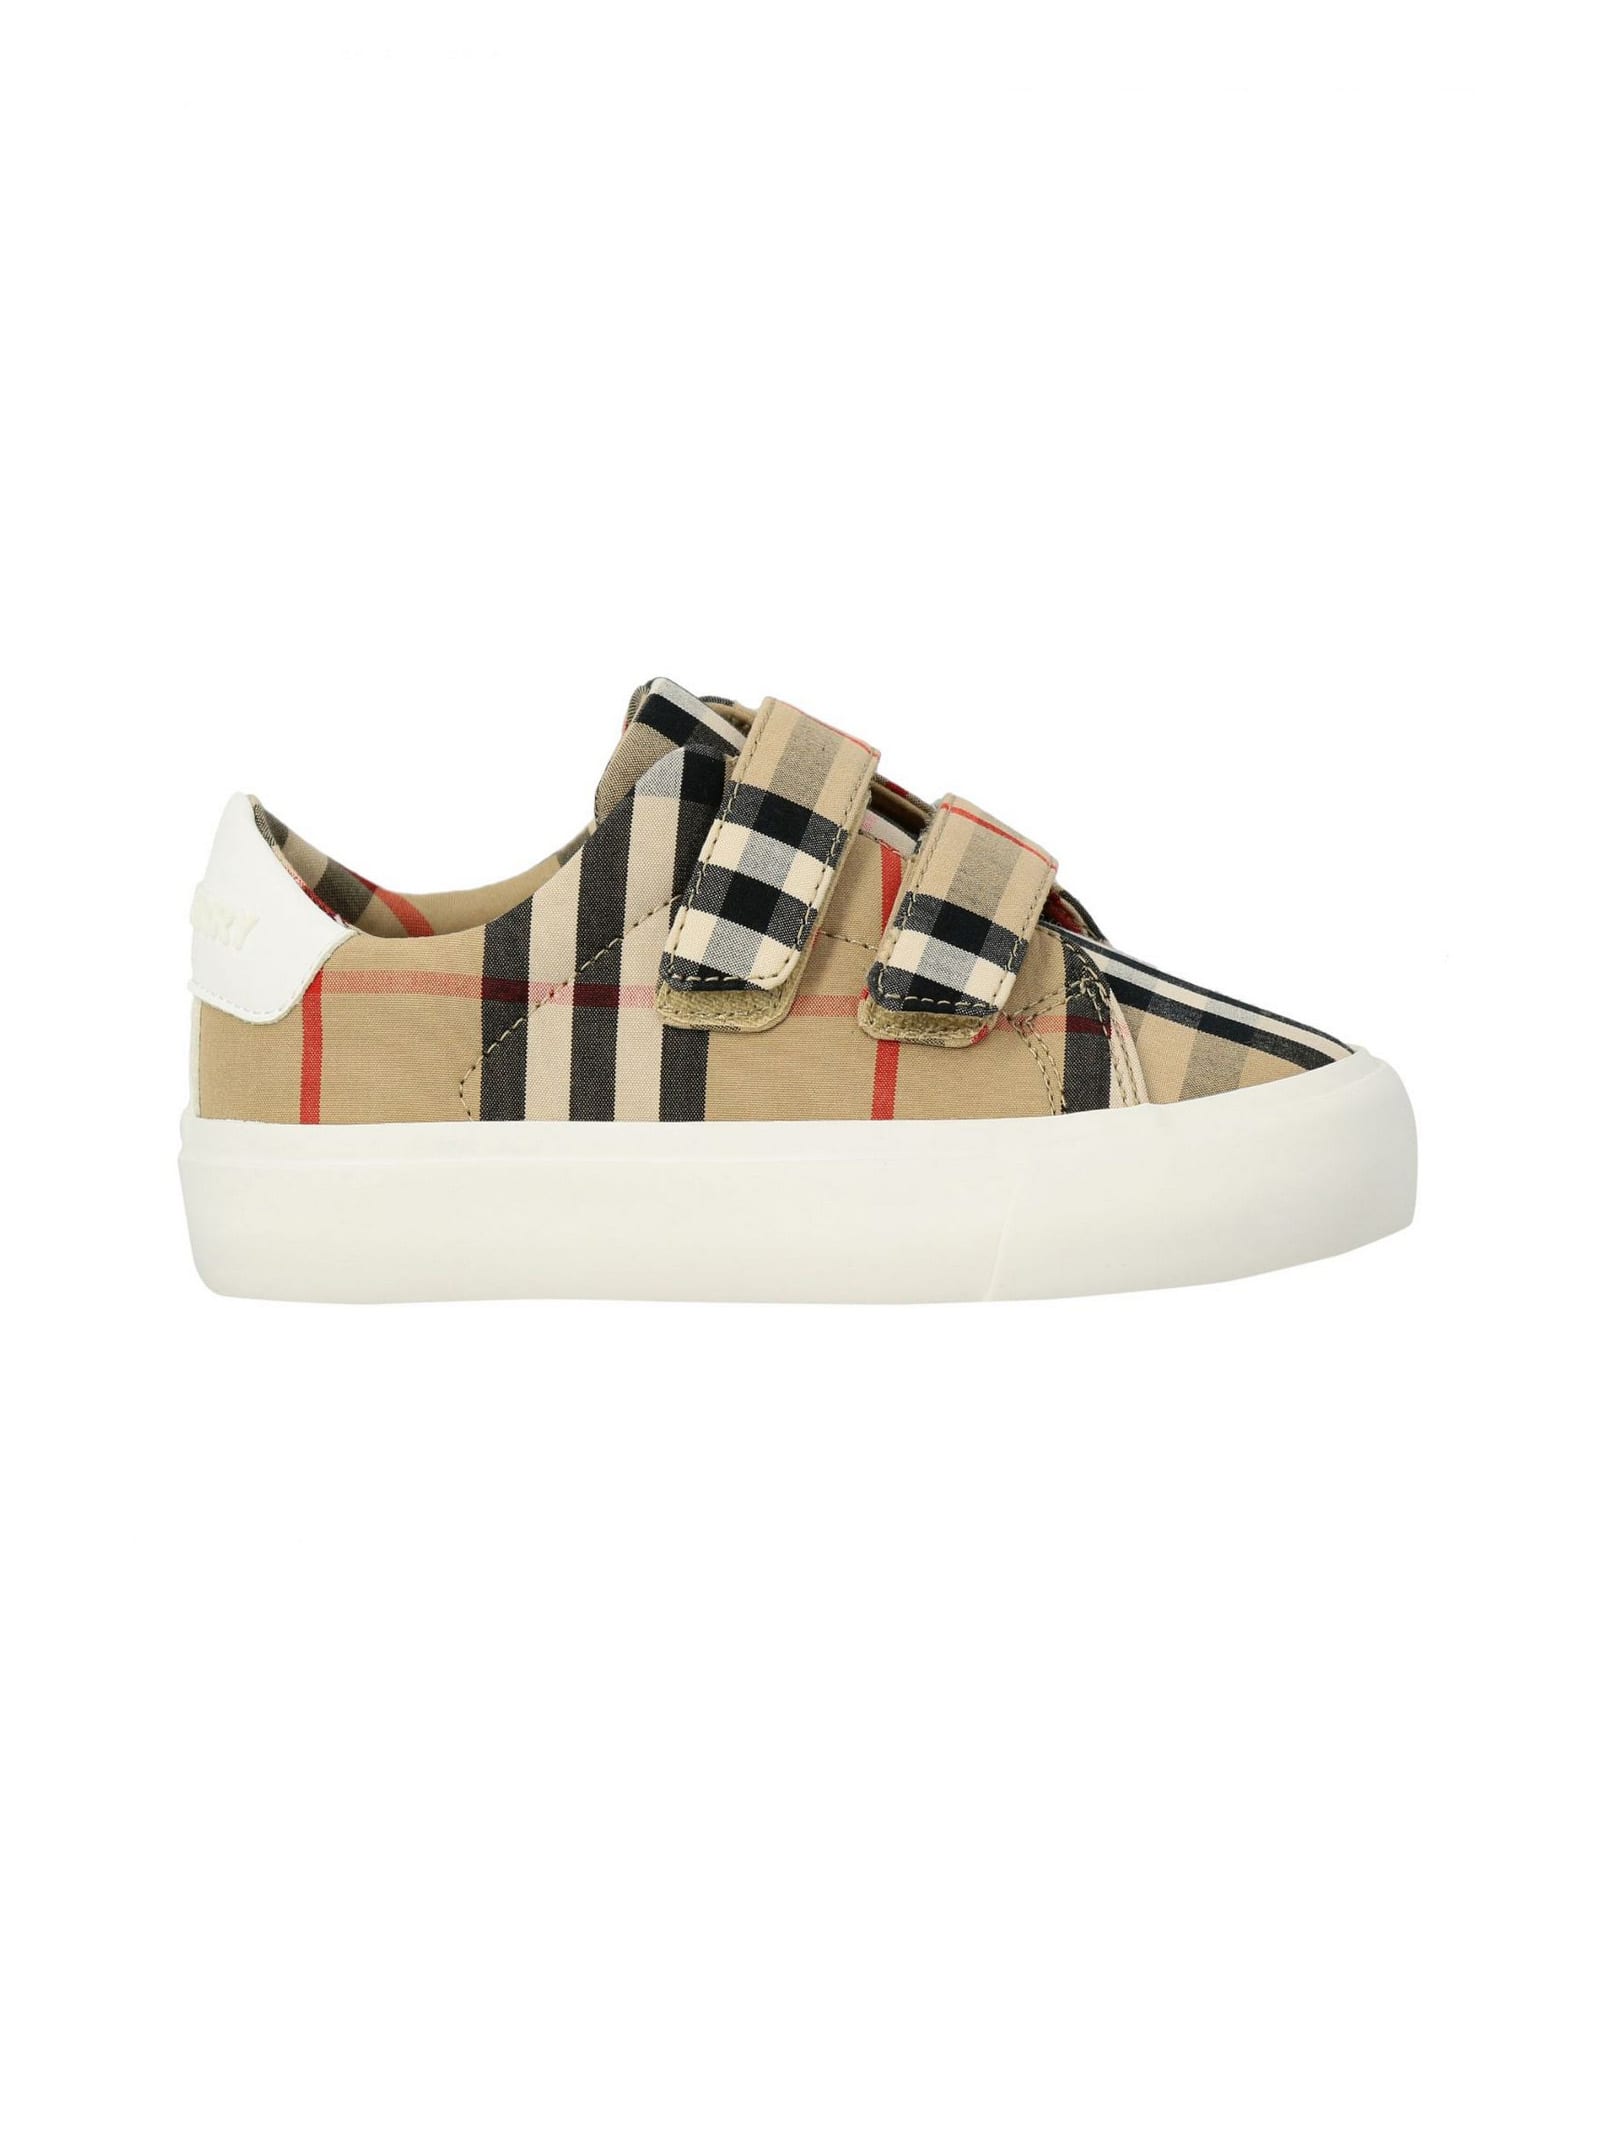 BURBERRY VINTAGE CHECK COTTON SNEAKERS,8018819 A1462